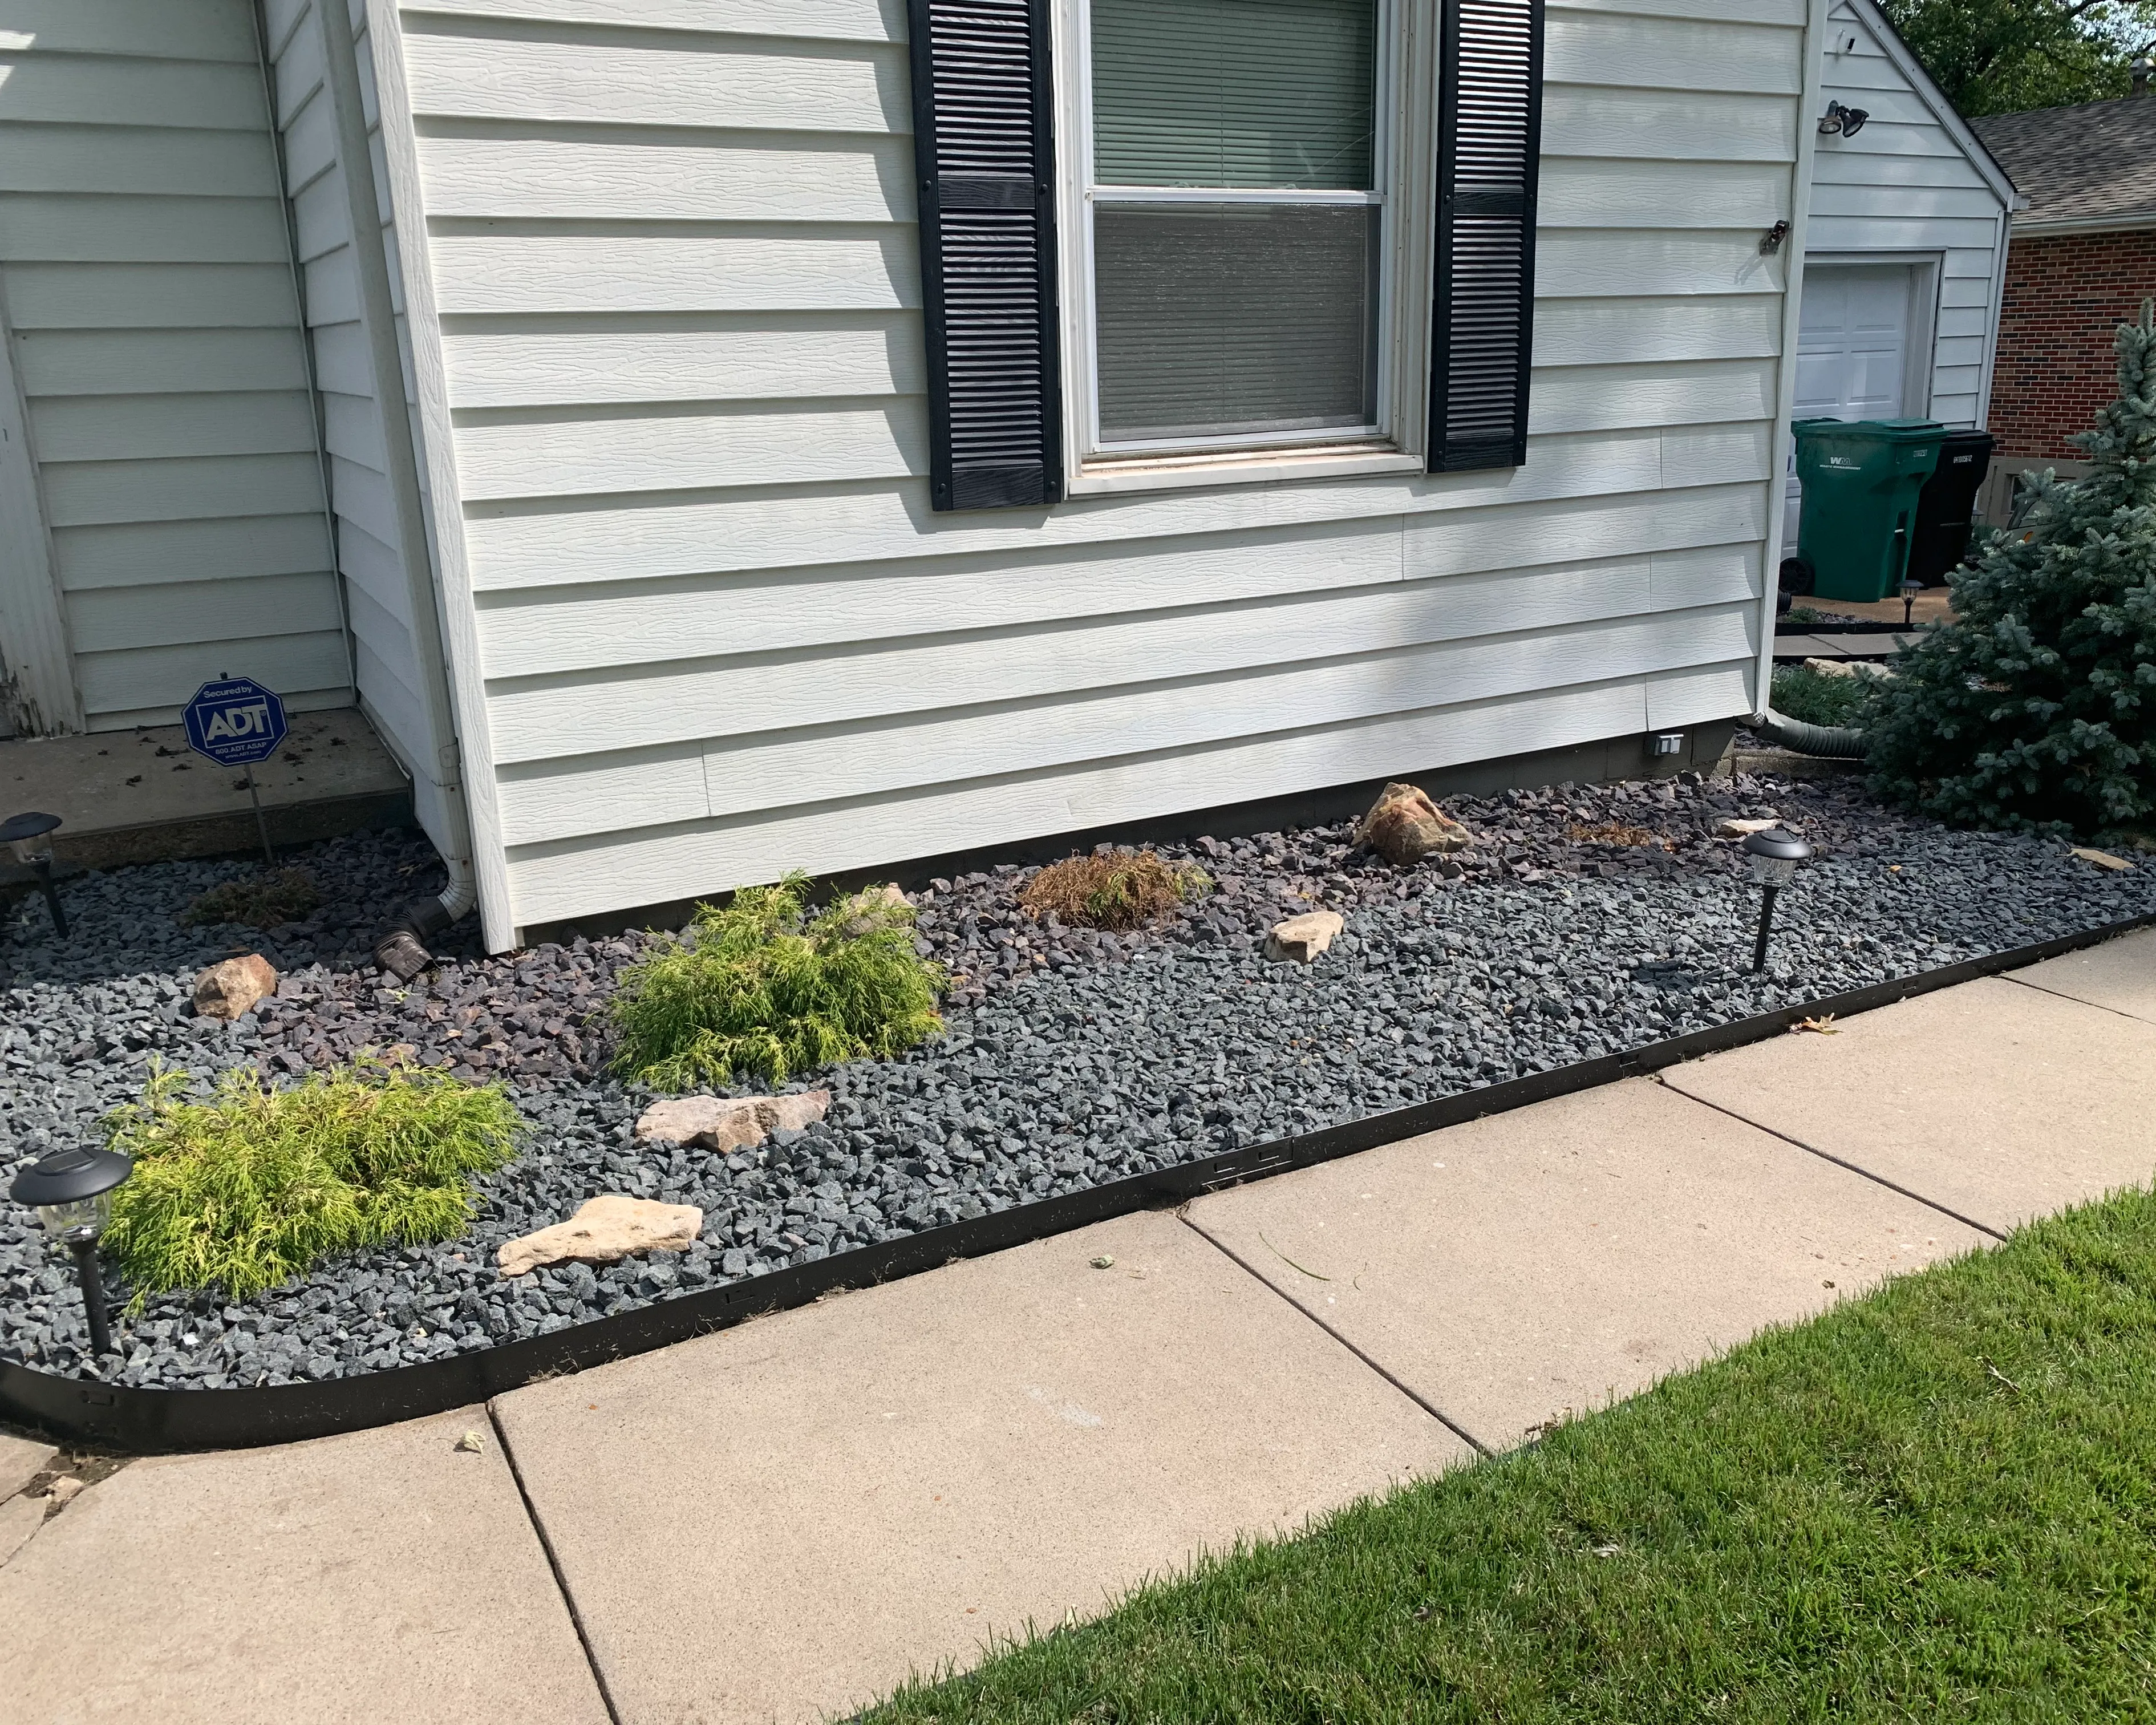 Landscaping for Jackson Lawn Services LLC in Florissant , MO